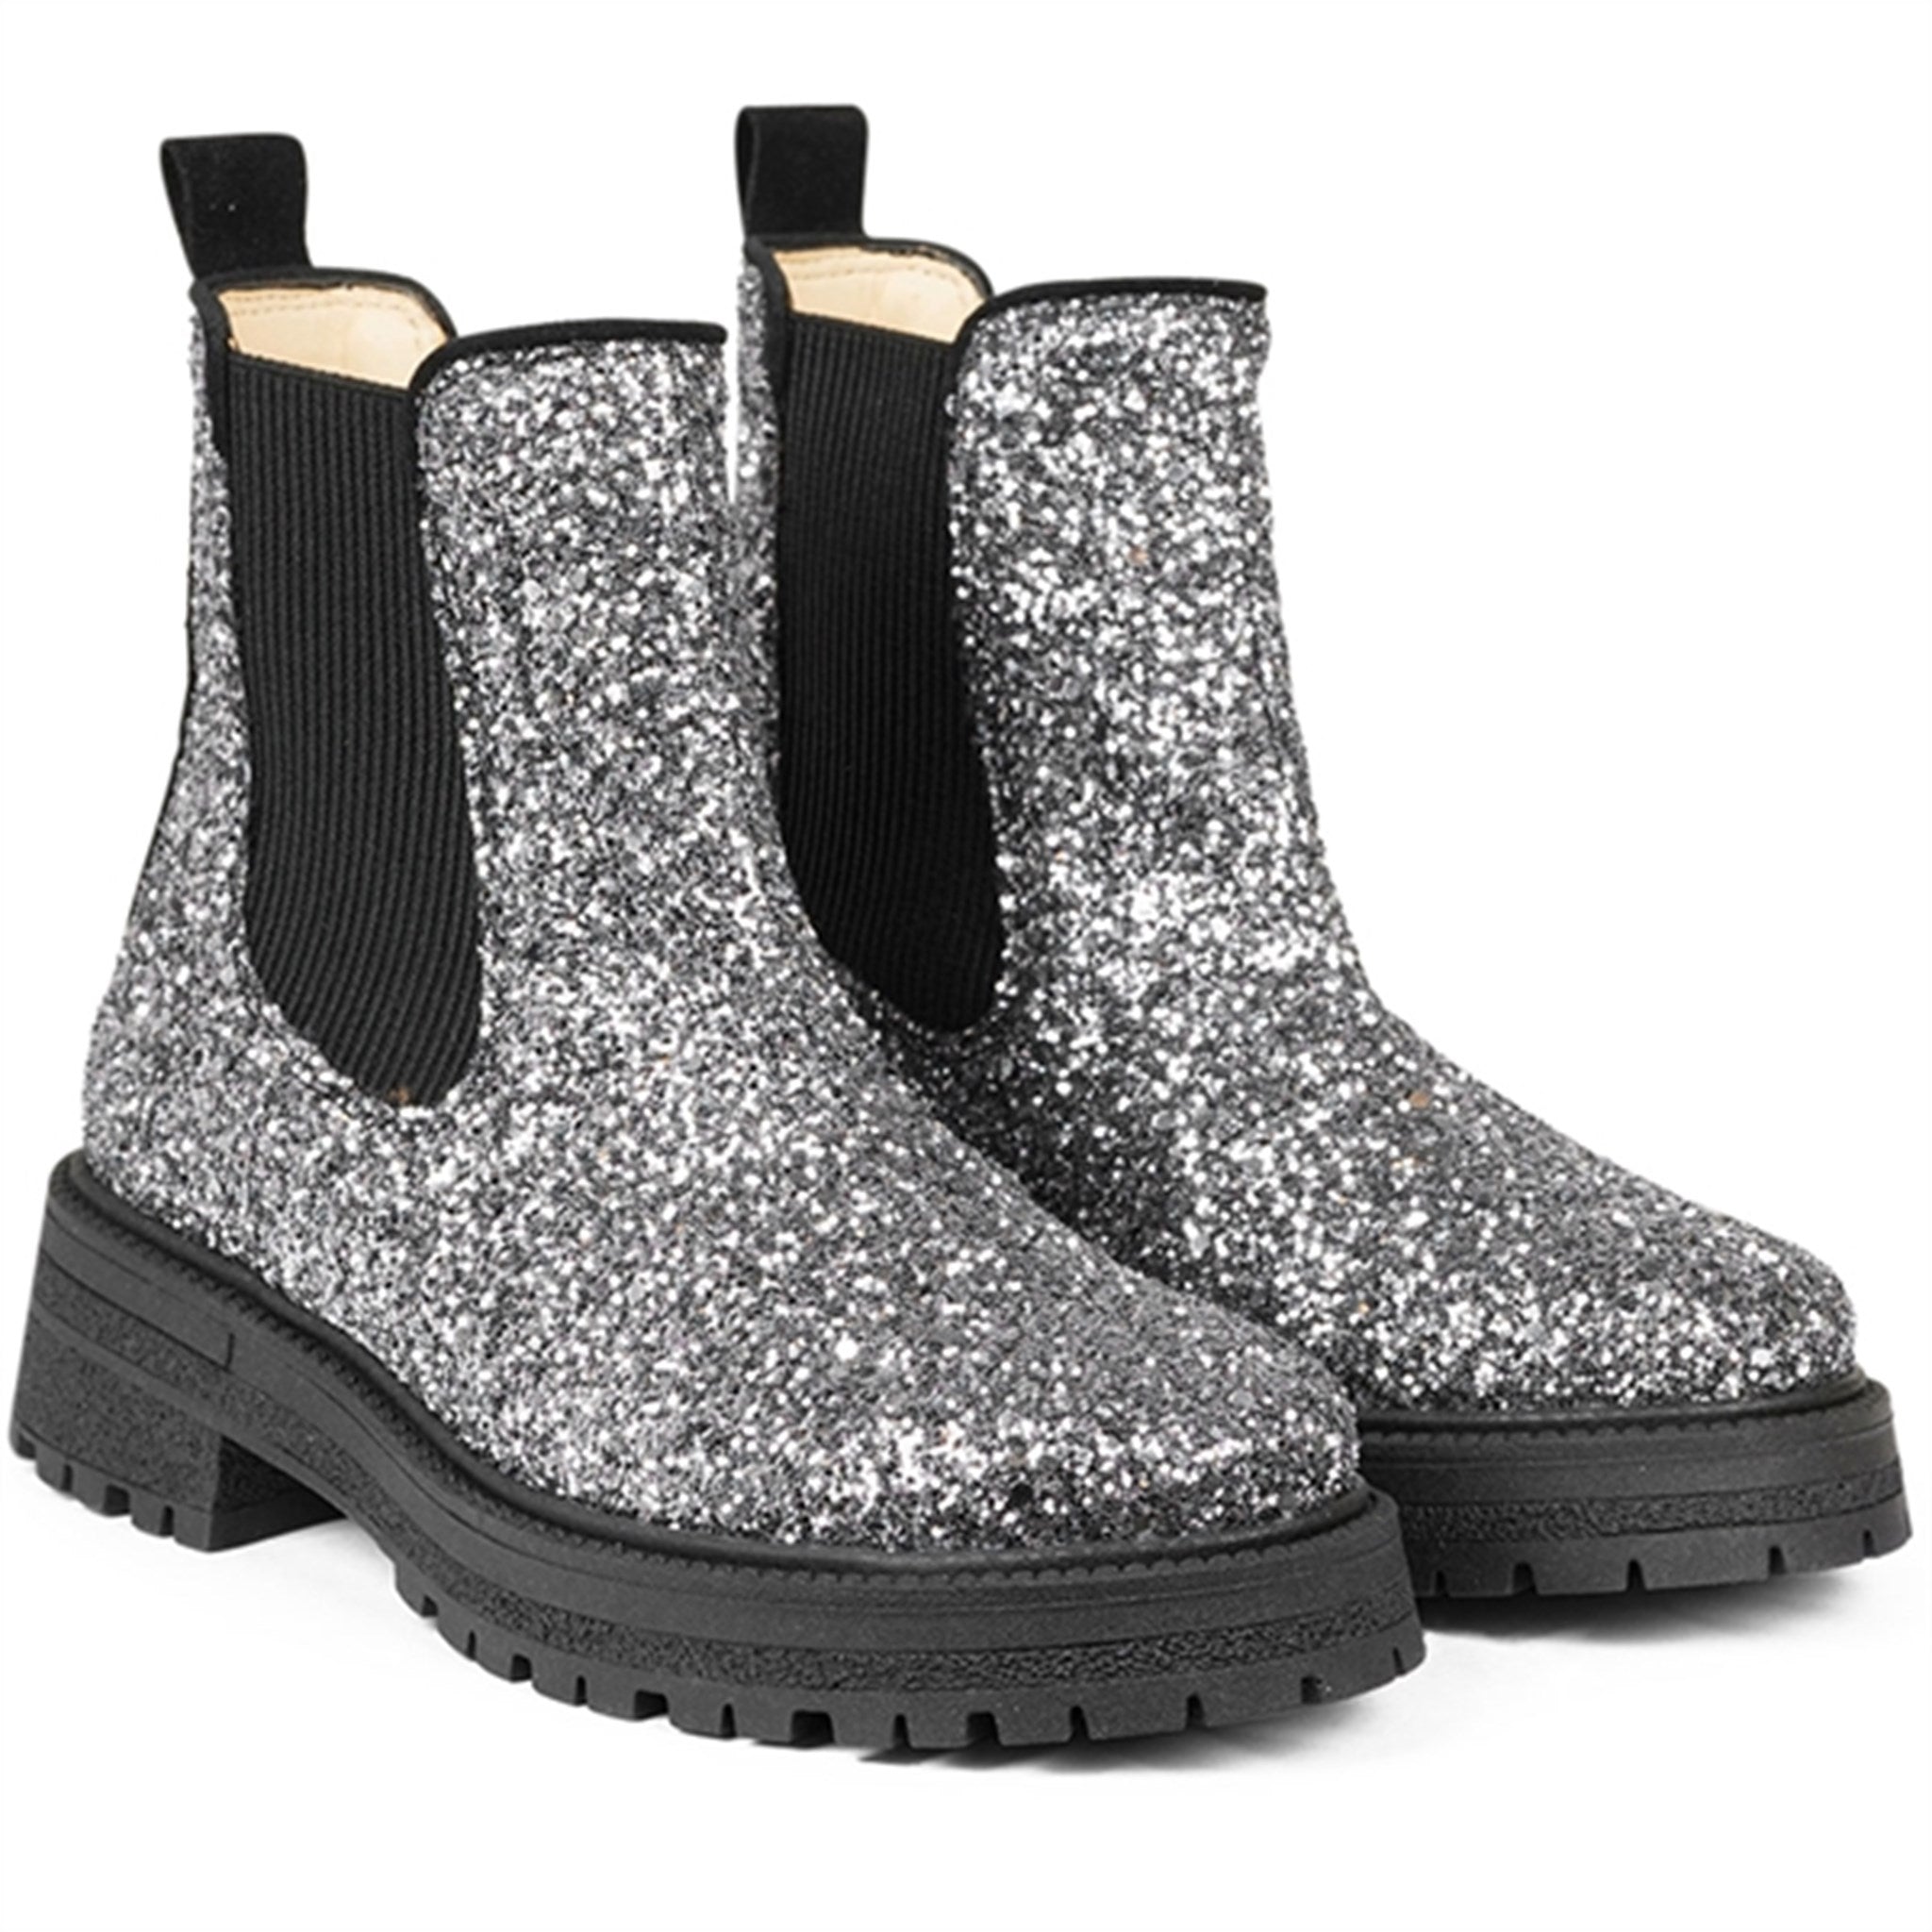 Angulus Chelsea Boots With Track-Sole Dusty Lavender Glitter/Black/Black